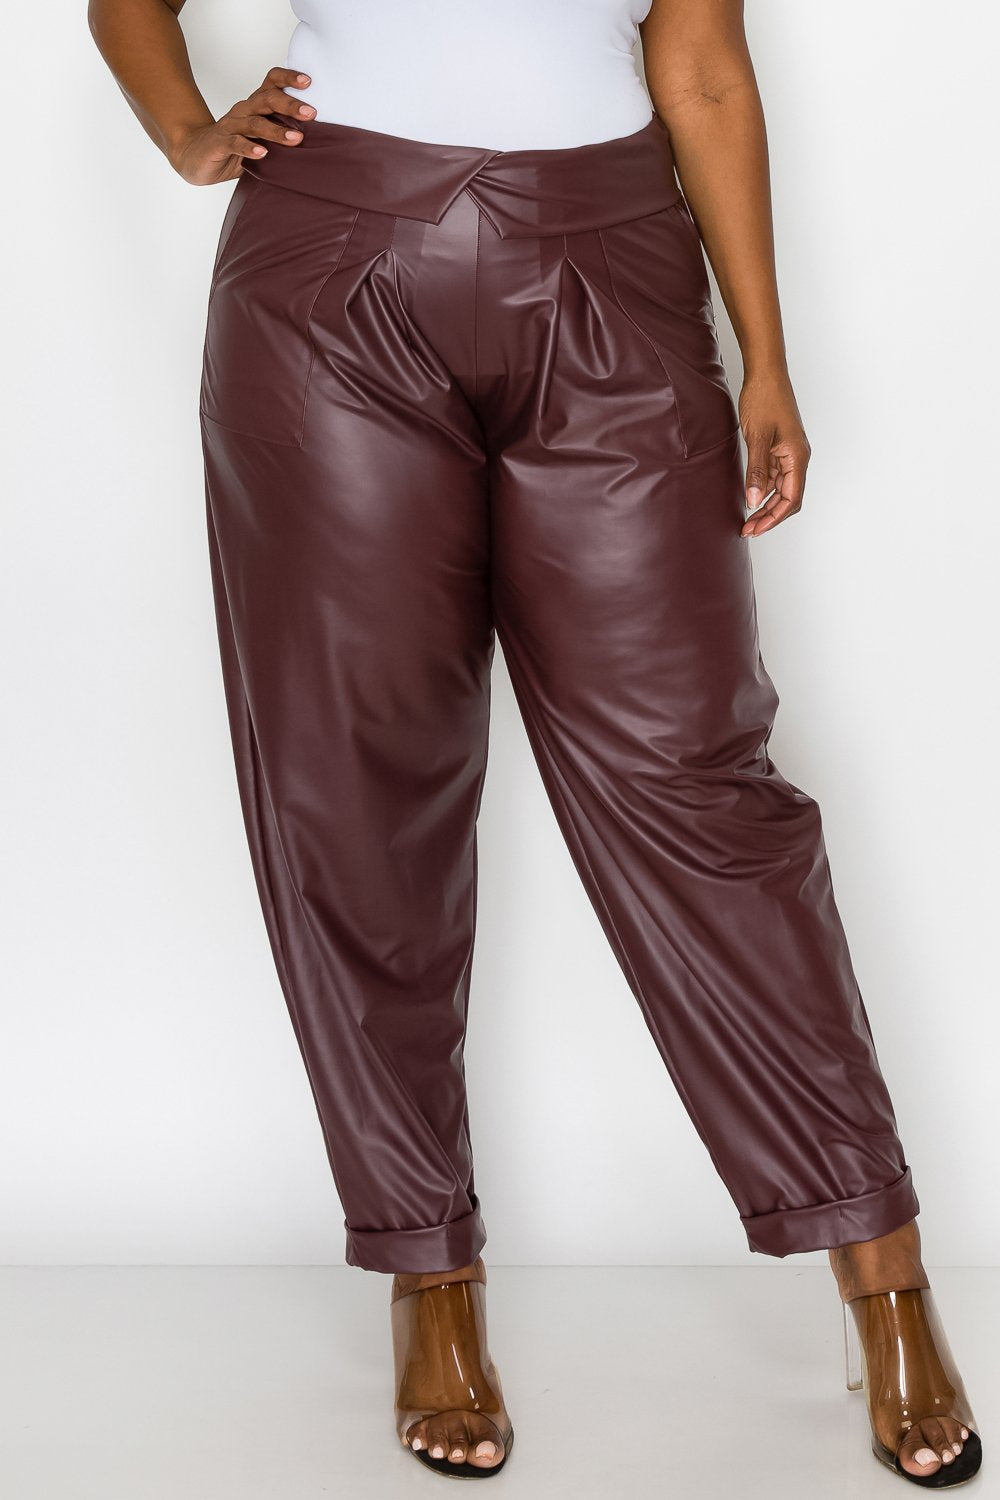 livd L I V D women's trendy plus size fashion made in USA contemporary collared faux leather pants pu with large outside pockets and folded ankle cuff in burgundy